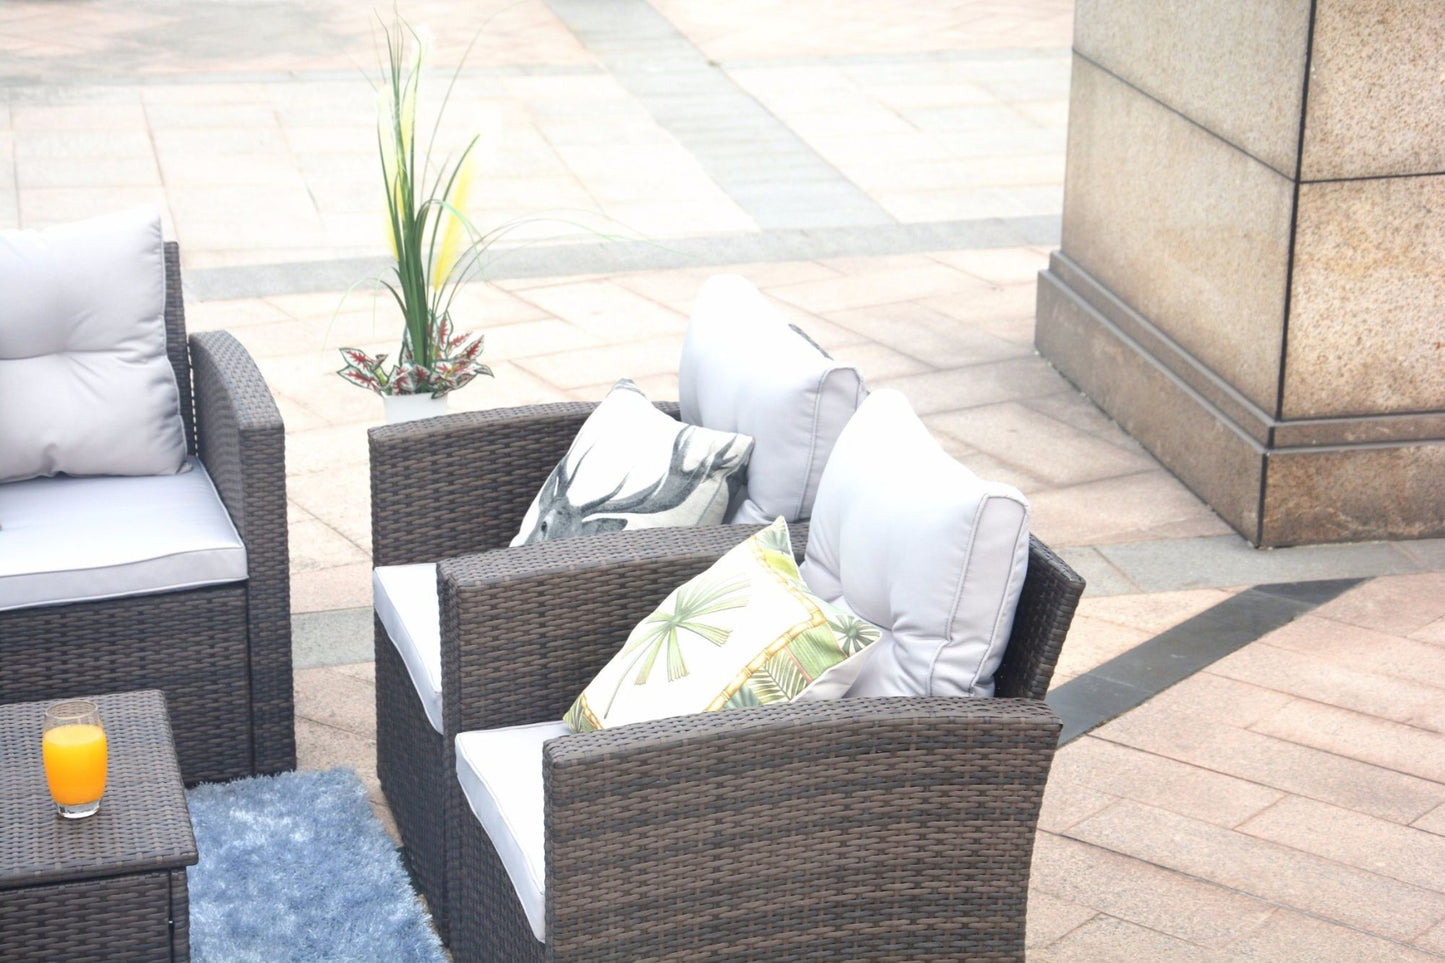 6PCS Outdoor Patio Sofa Set Reconfigurable Stylish And Modern Style With Seat Cushions